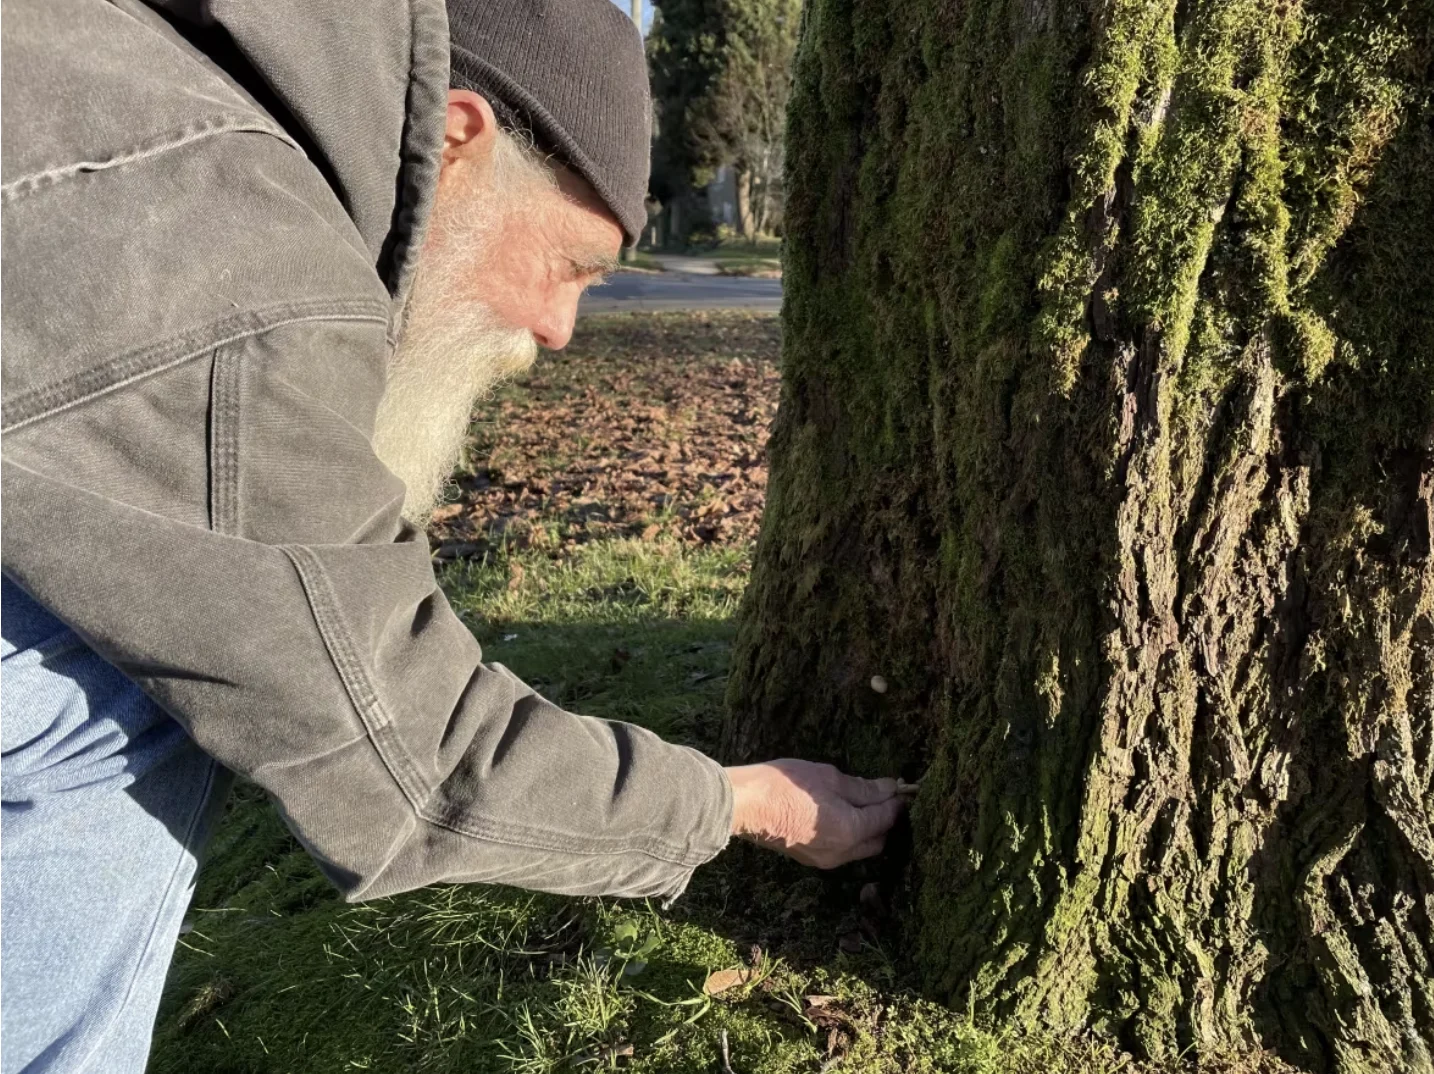 cbc: Paul Kroeger looks at a mushroom growing from a street tree in Vancouver in December 2021. (Chad Pawson/CBC News)